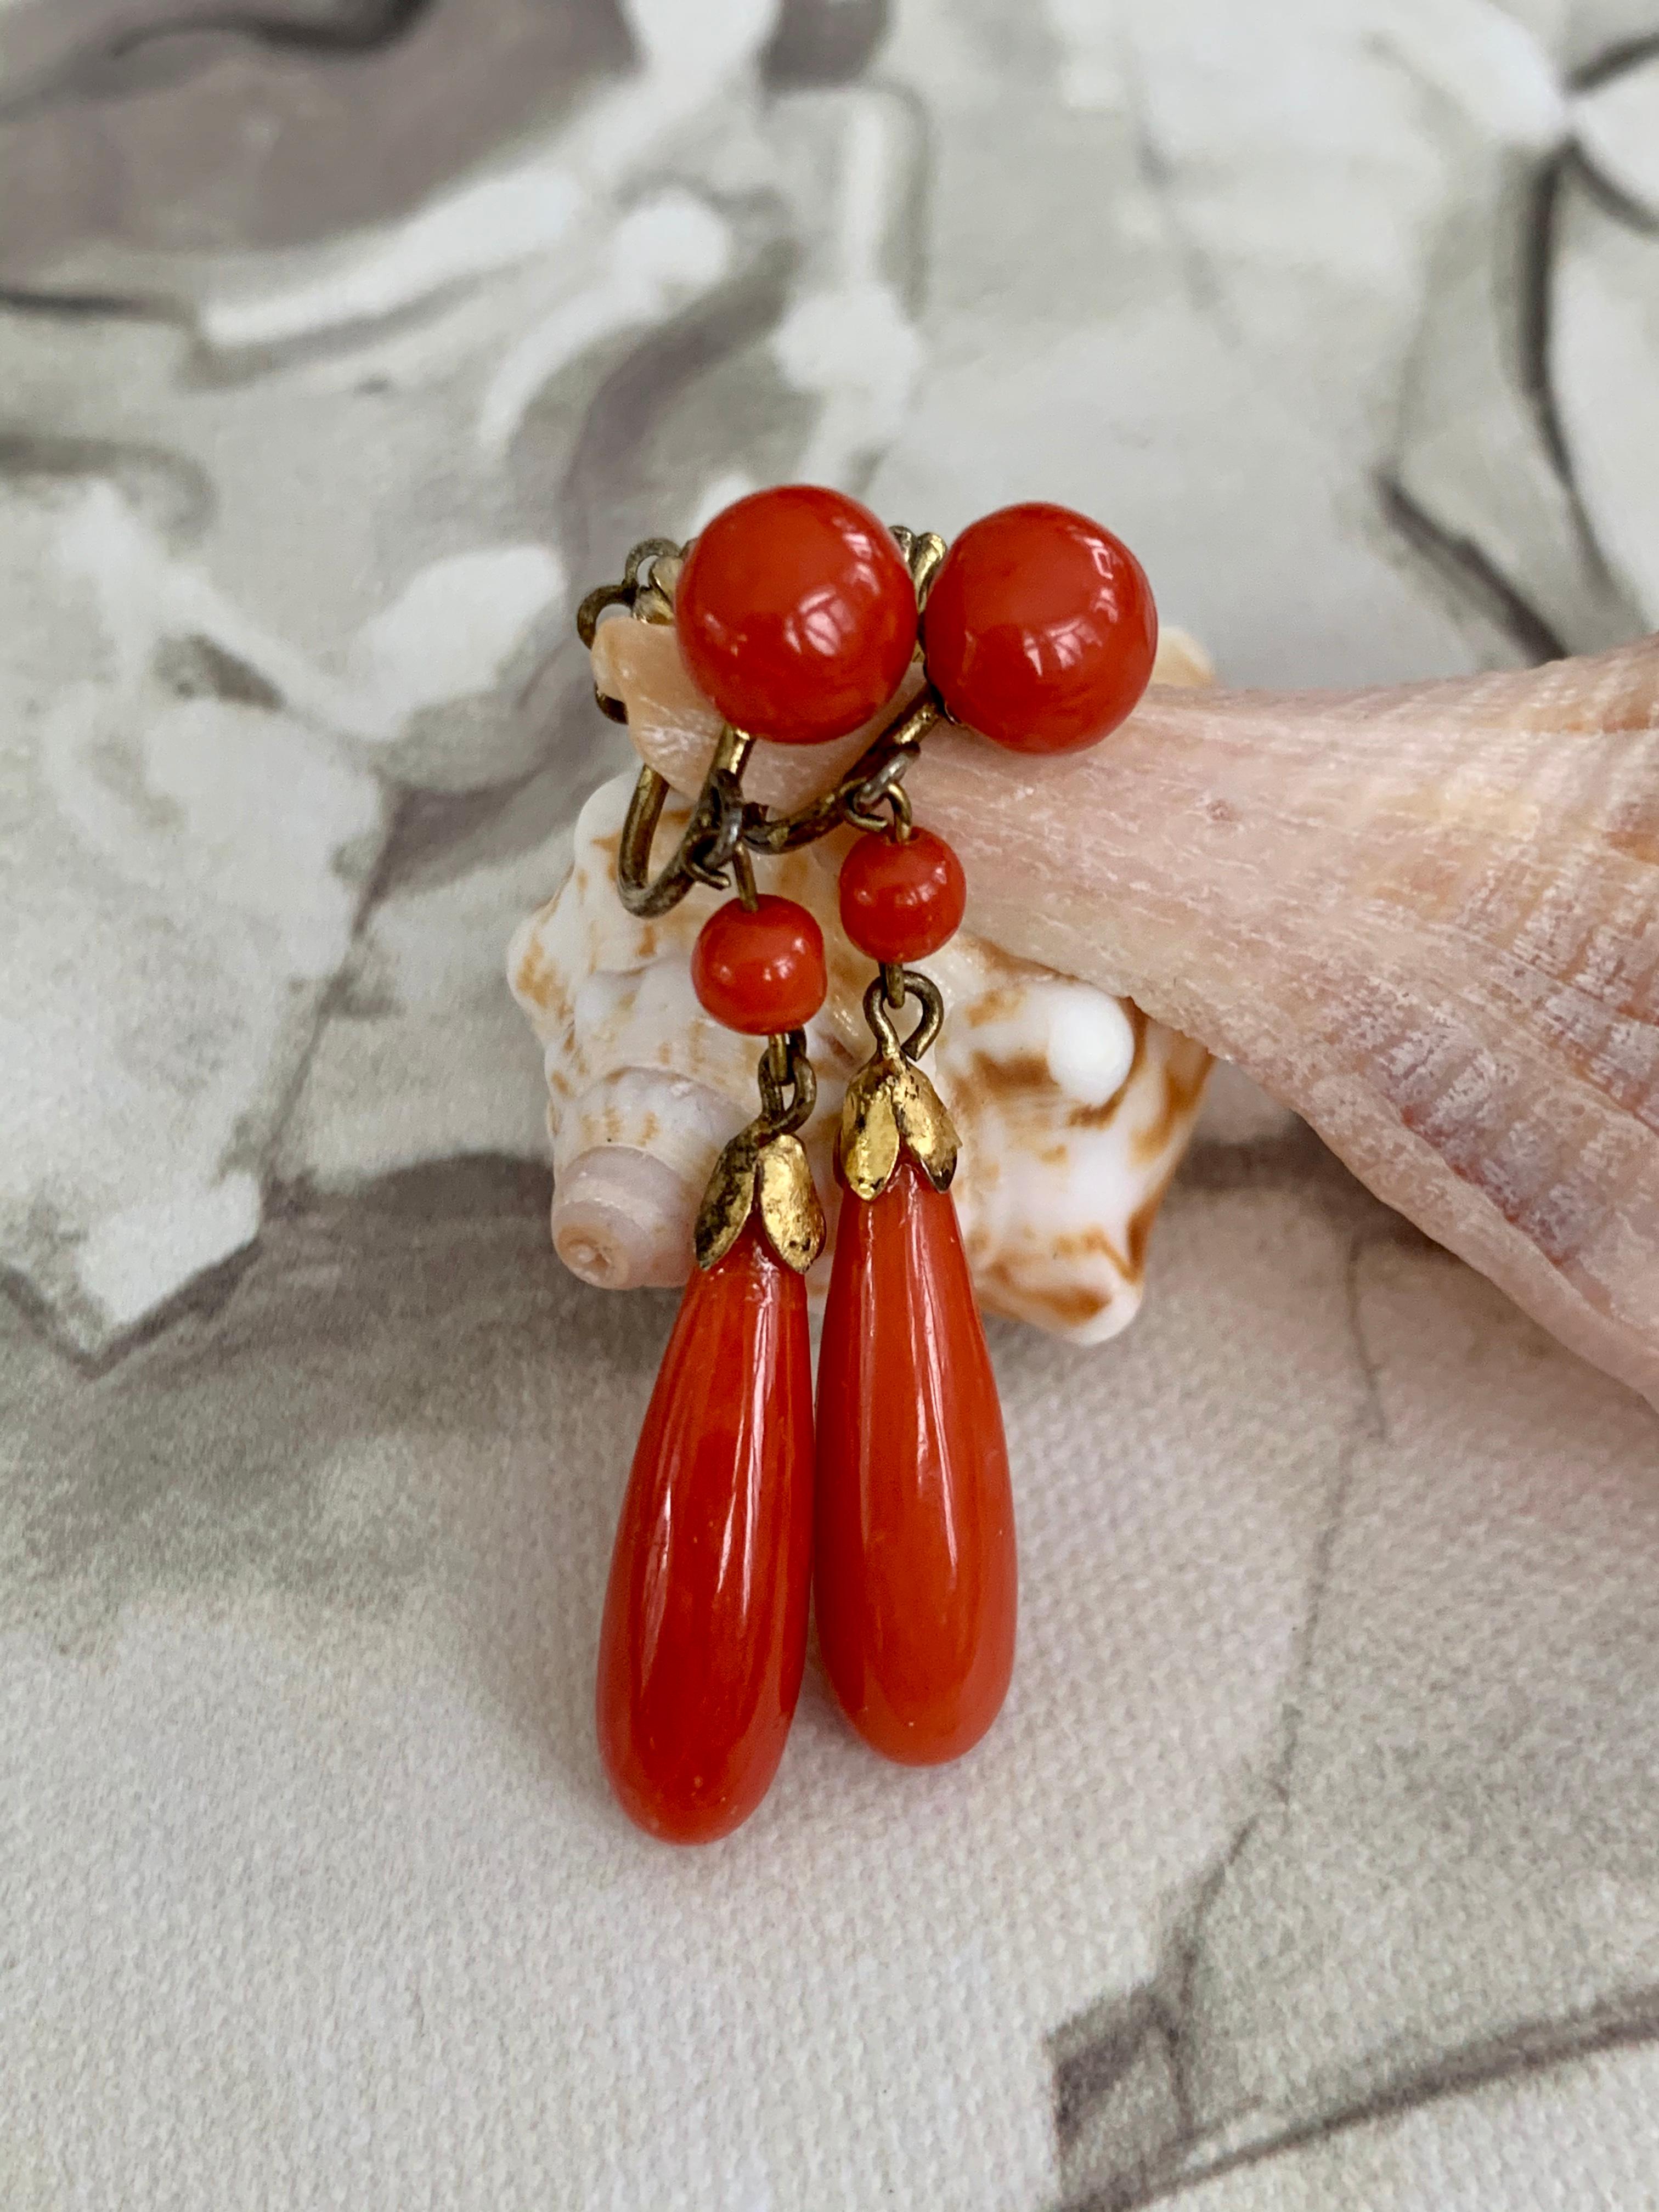 These beautiful Italian dangle earrings feature teardrop-shaped coral.  Each earring also has two additional round graduated Coral stones.  The backs are screw back and are made of Silver.

Length:  1 3/4